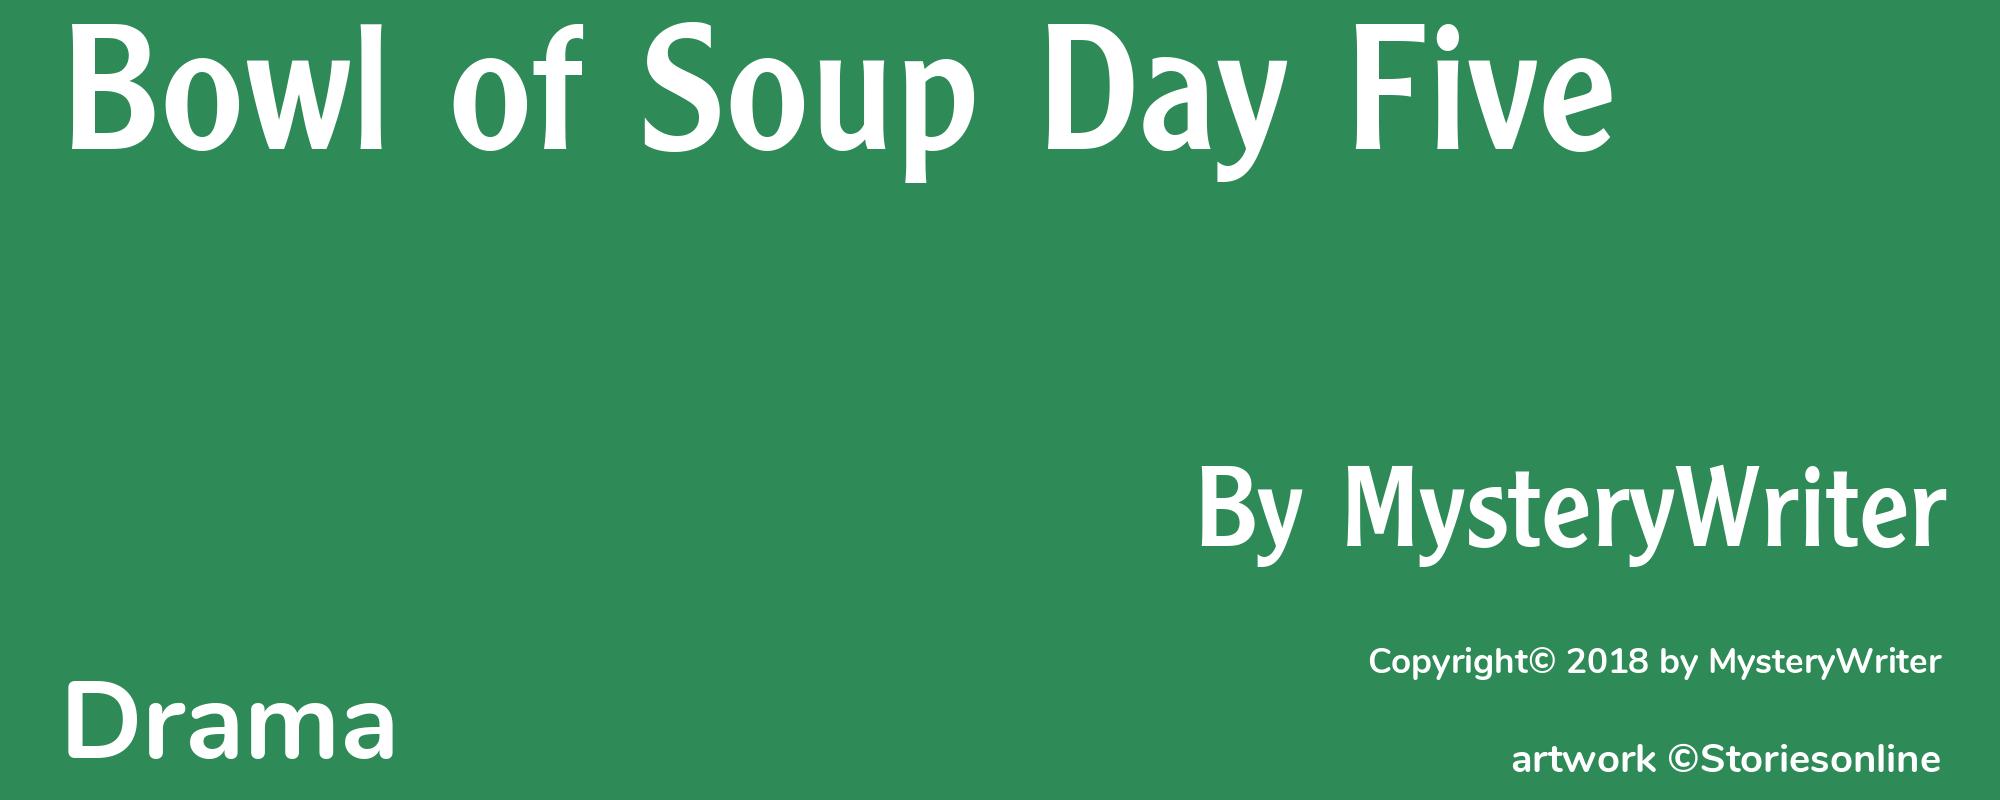 Bowl of Soup Day Five - Cover